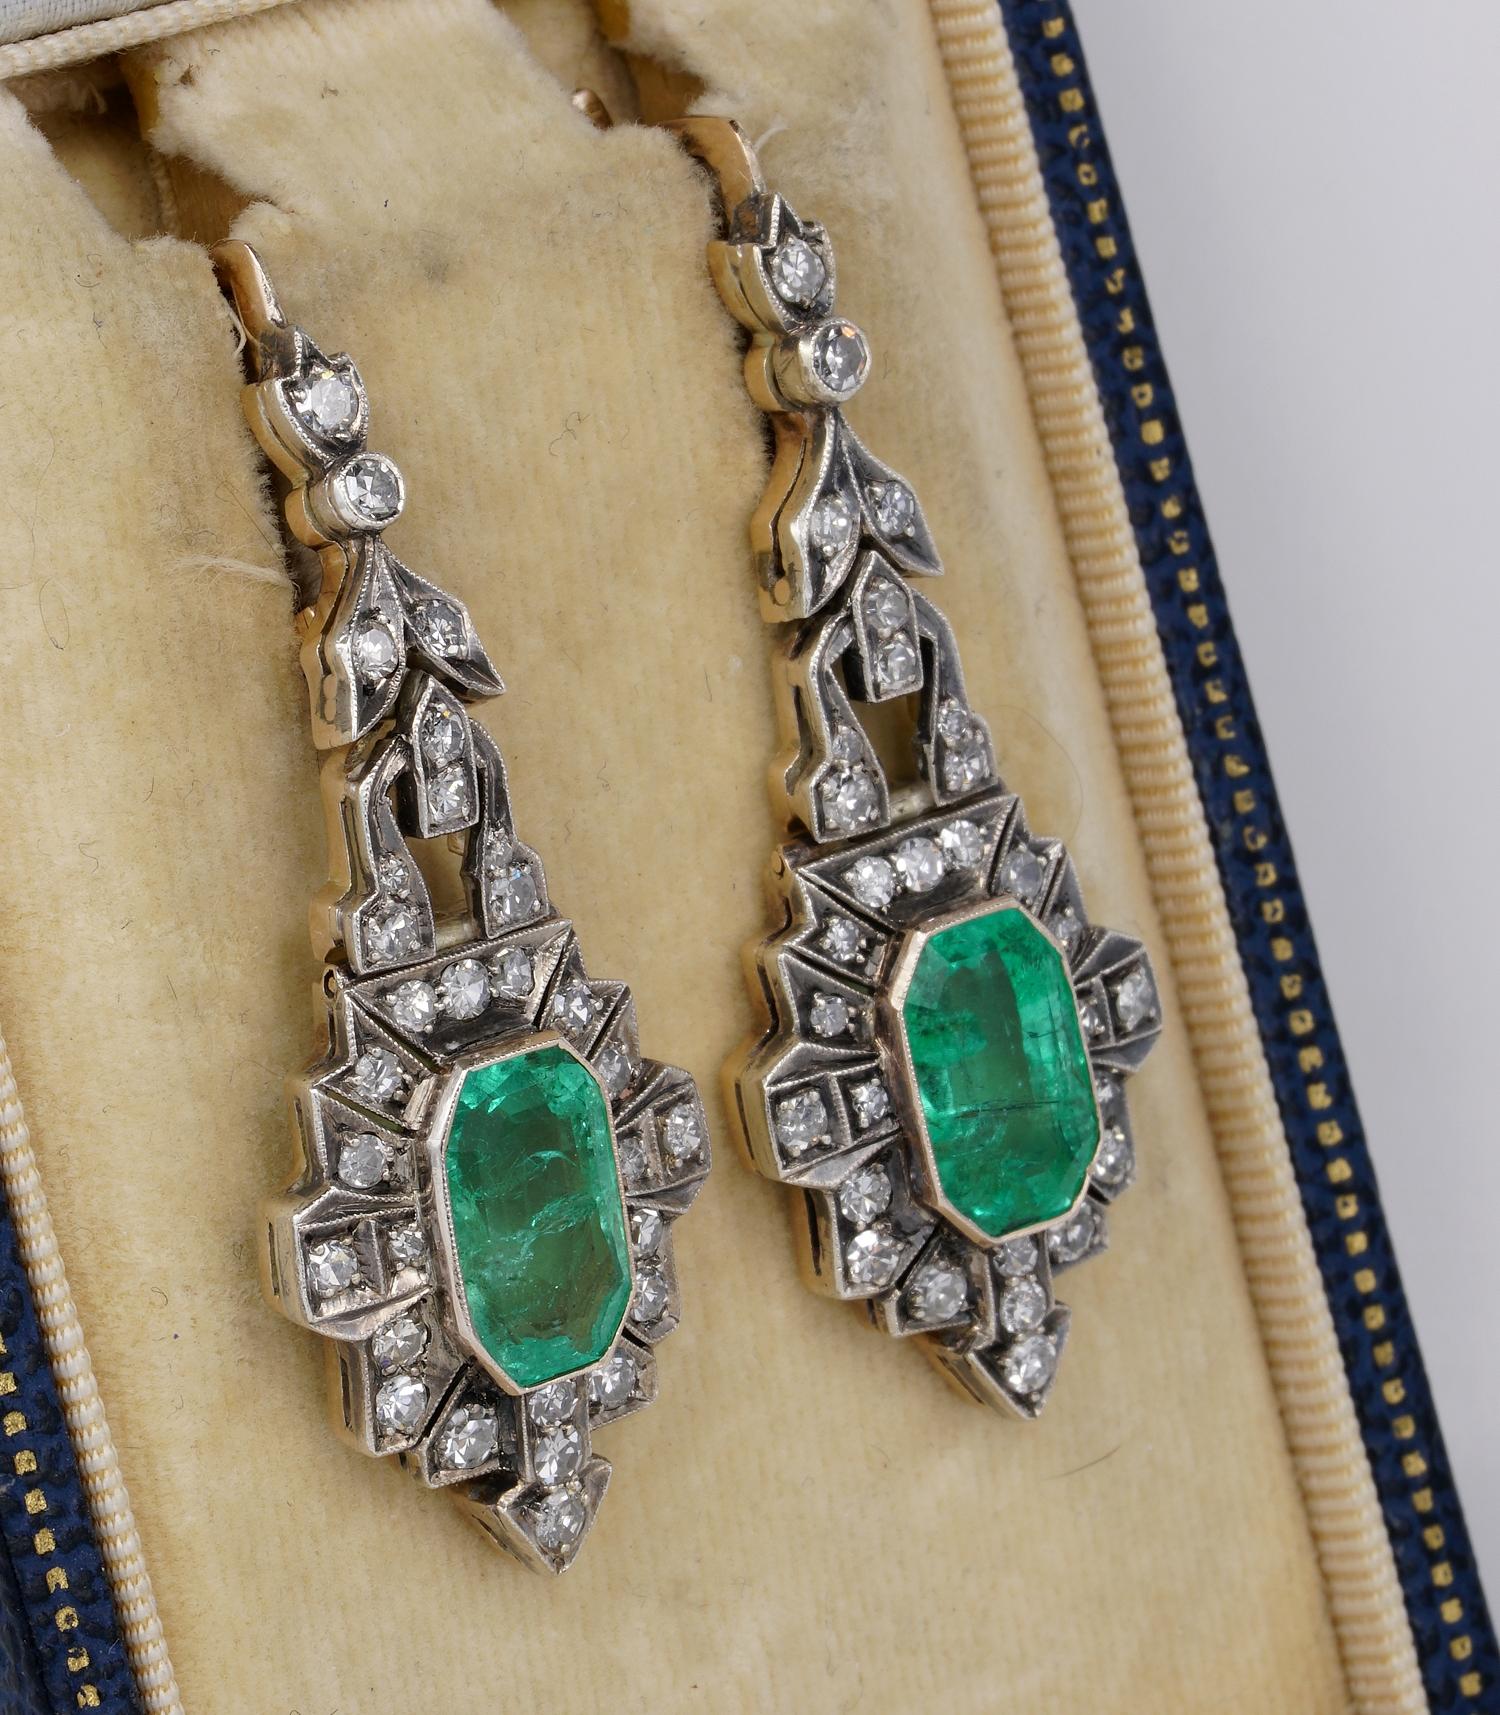 Be the Star! 

Impressive, ravishing, rare, early Deco earring in transition to the Edwardian period, probably Russian – not marked – authentic antique drop earrings
Statement and big presence artfully hand crafted during 1915 ca – articulated